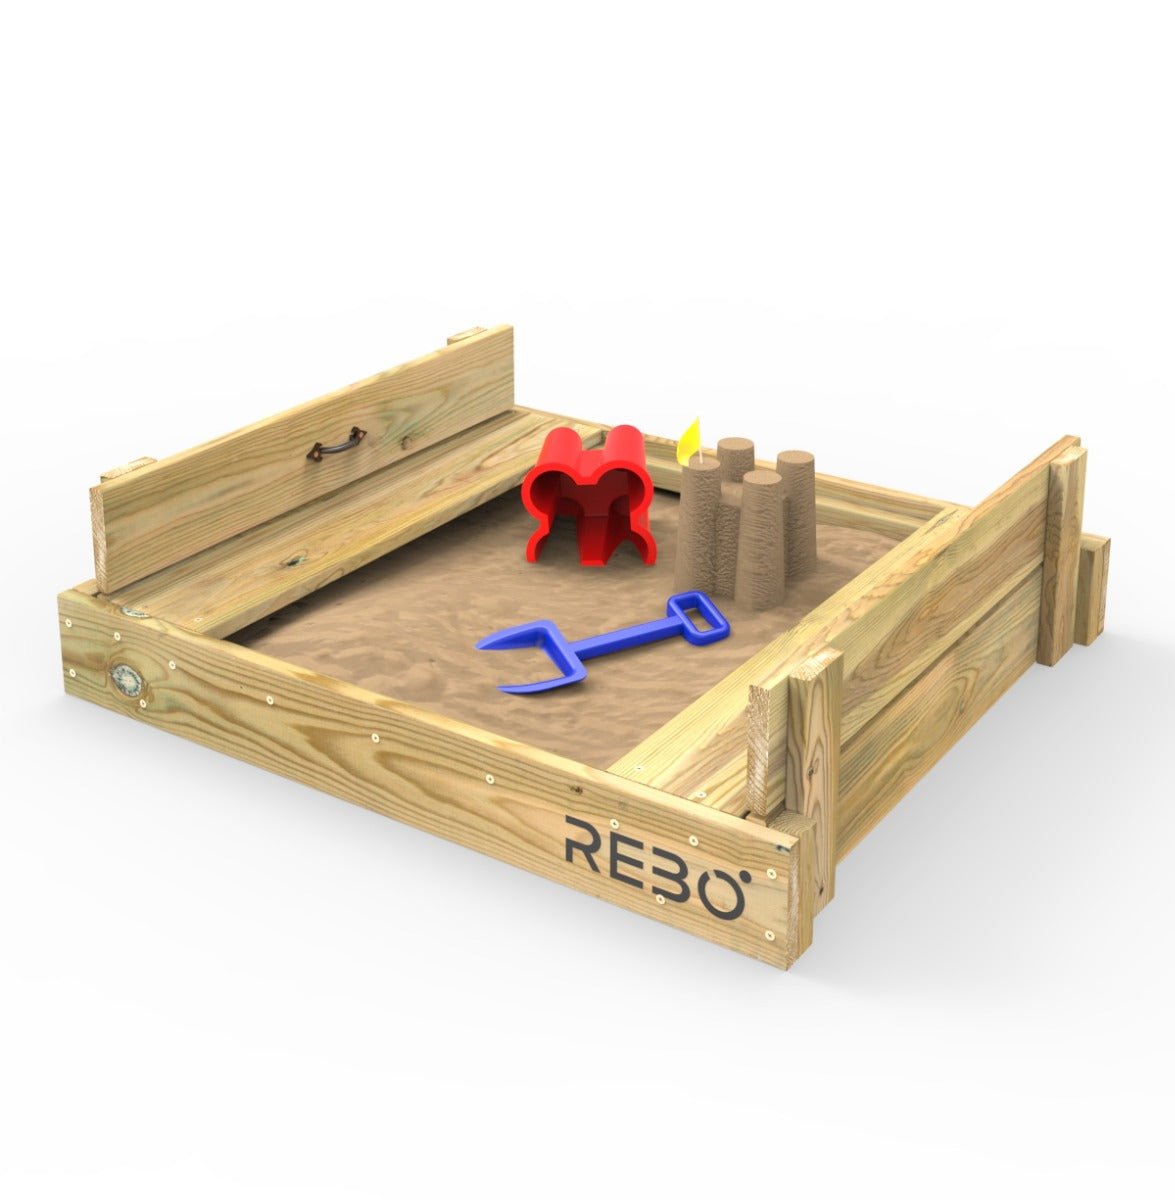 Rebo Wooden Sandpit Ball Pool with Folding Lid and Benches – 80cm x 80cm